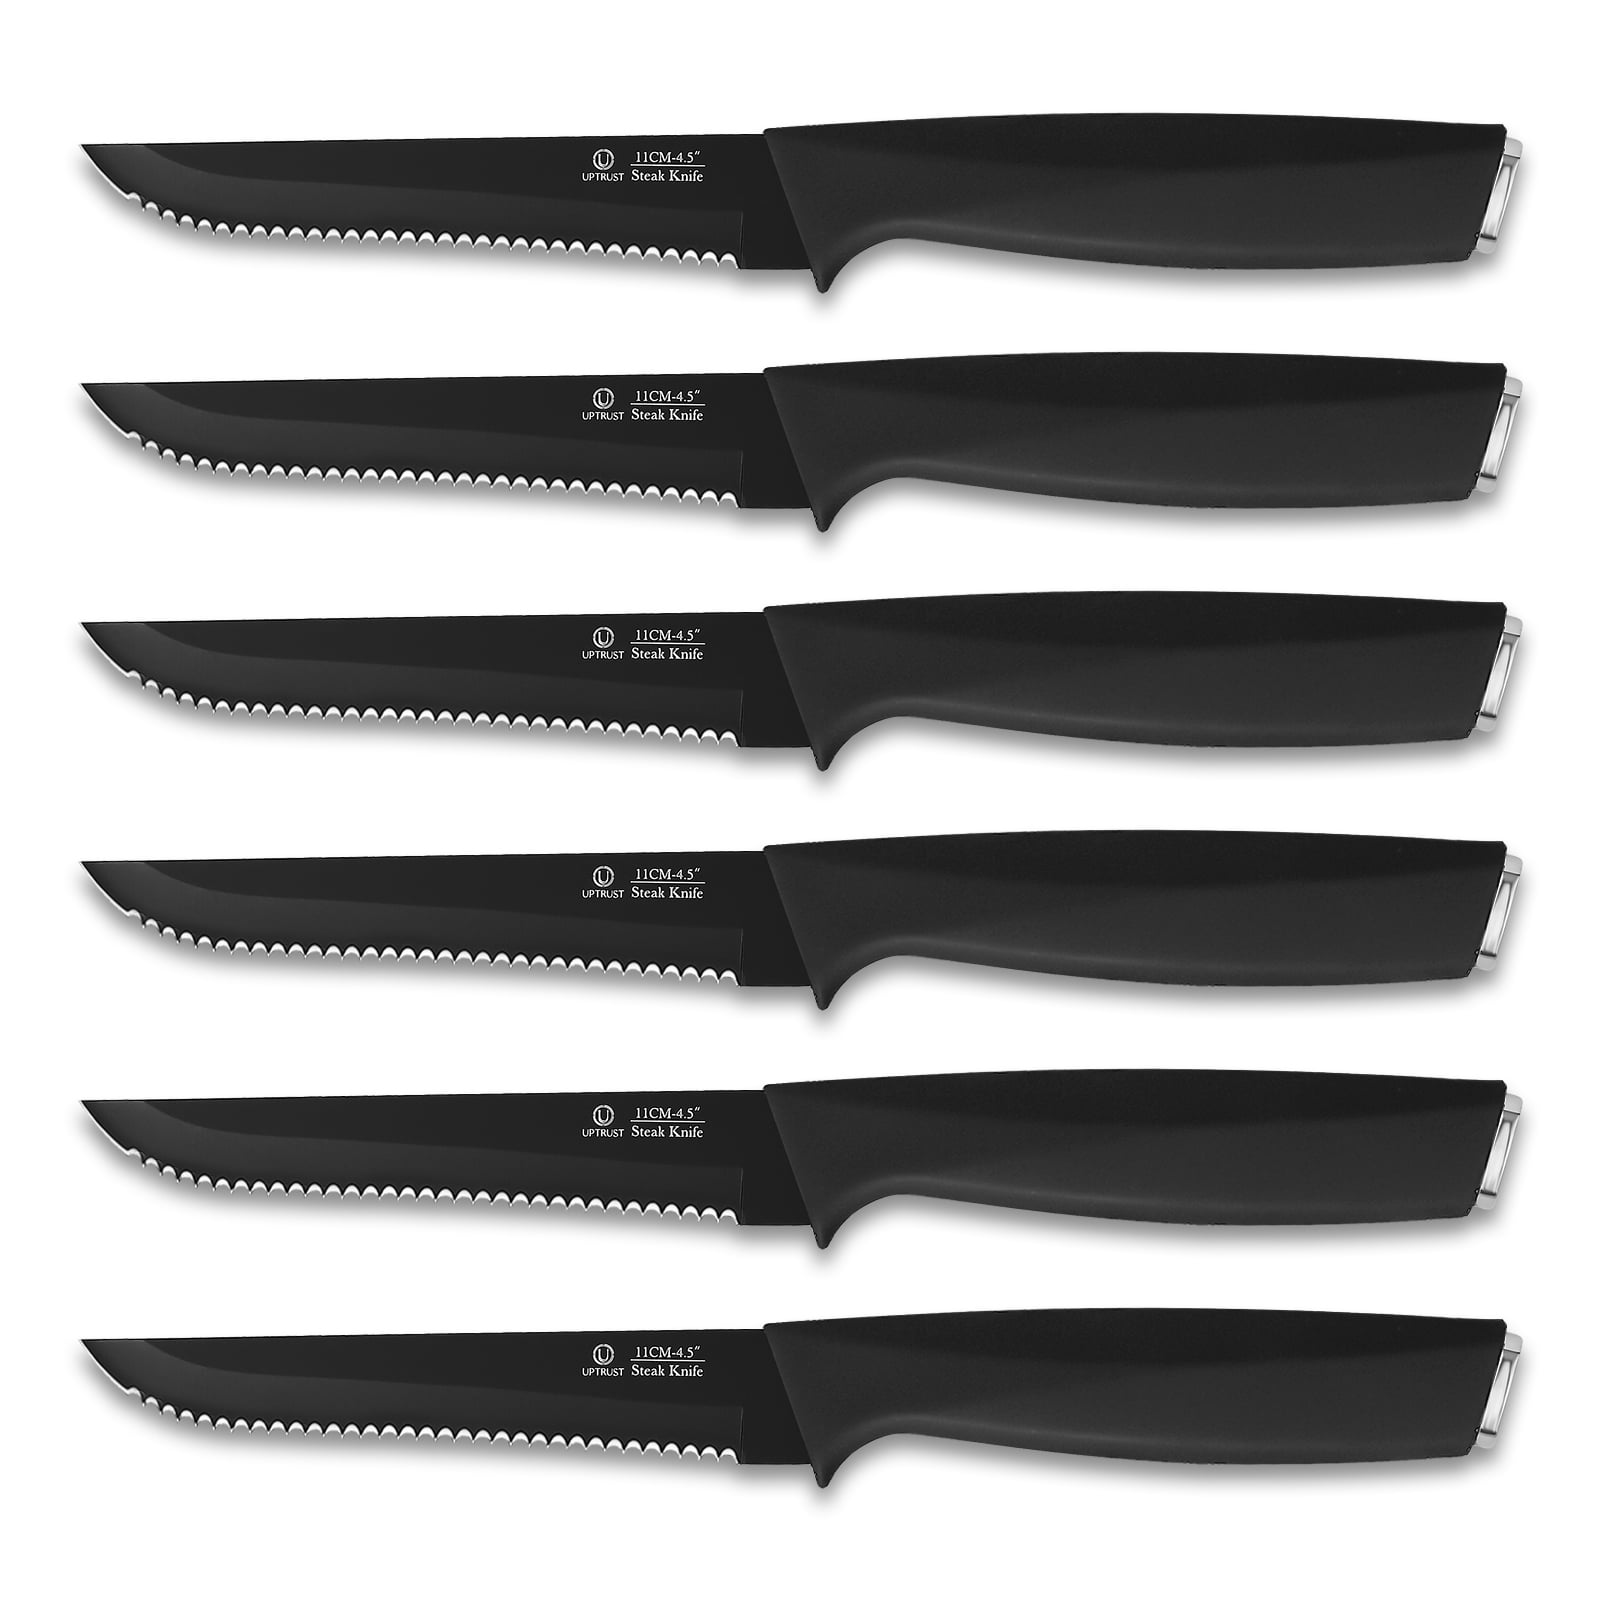 TURWHO 1-14PCS 5 Inch Steak Knives Set Germany 1.4116 Stainless